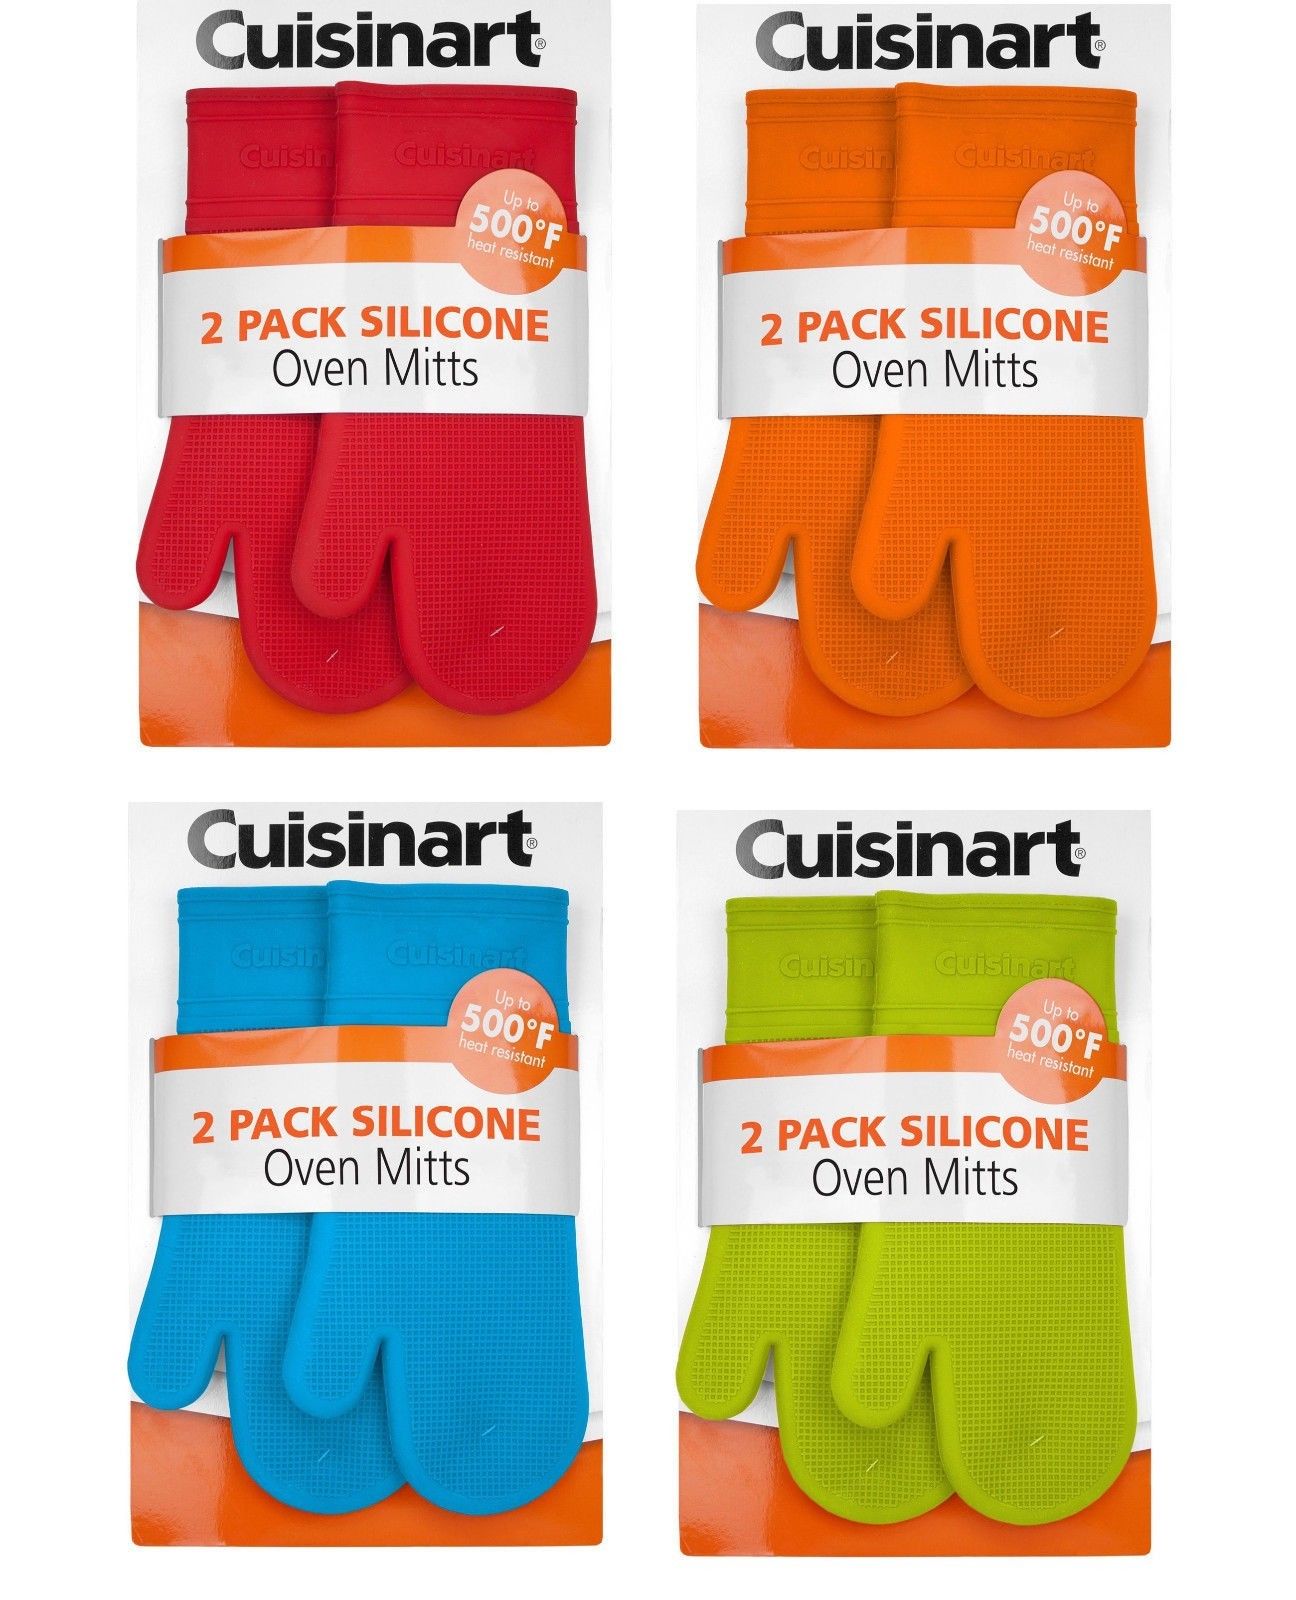 Cuisinart Silicone Oven Mitts, 2 Pack New Assorted Colors